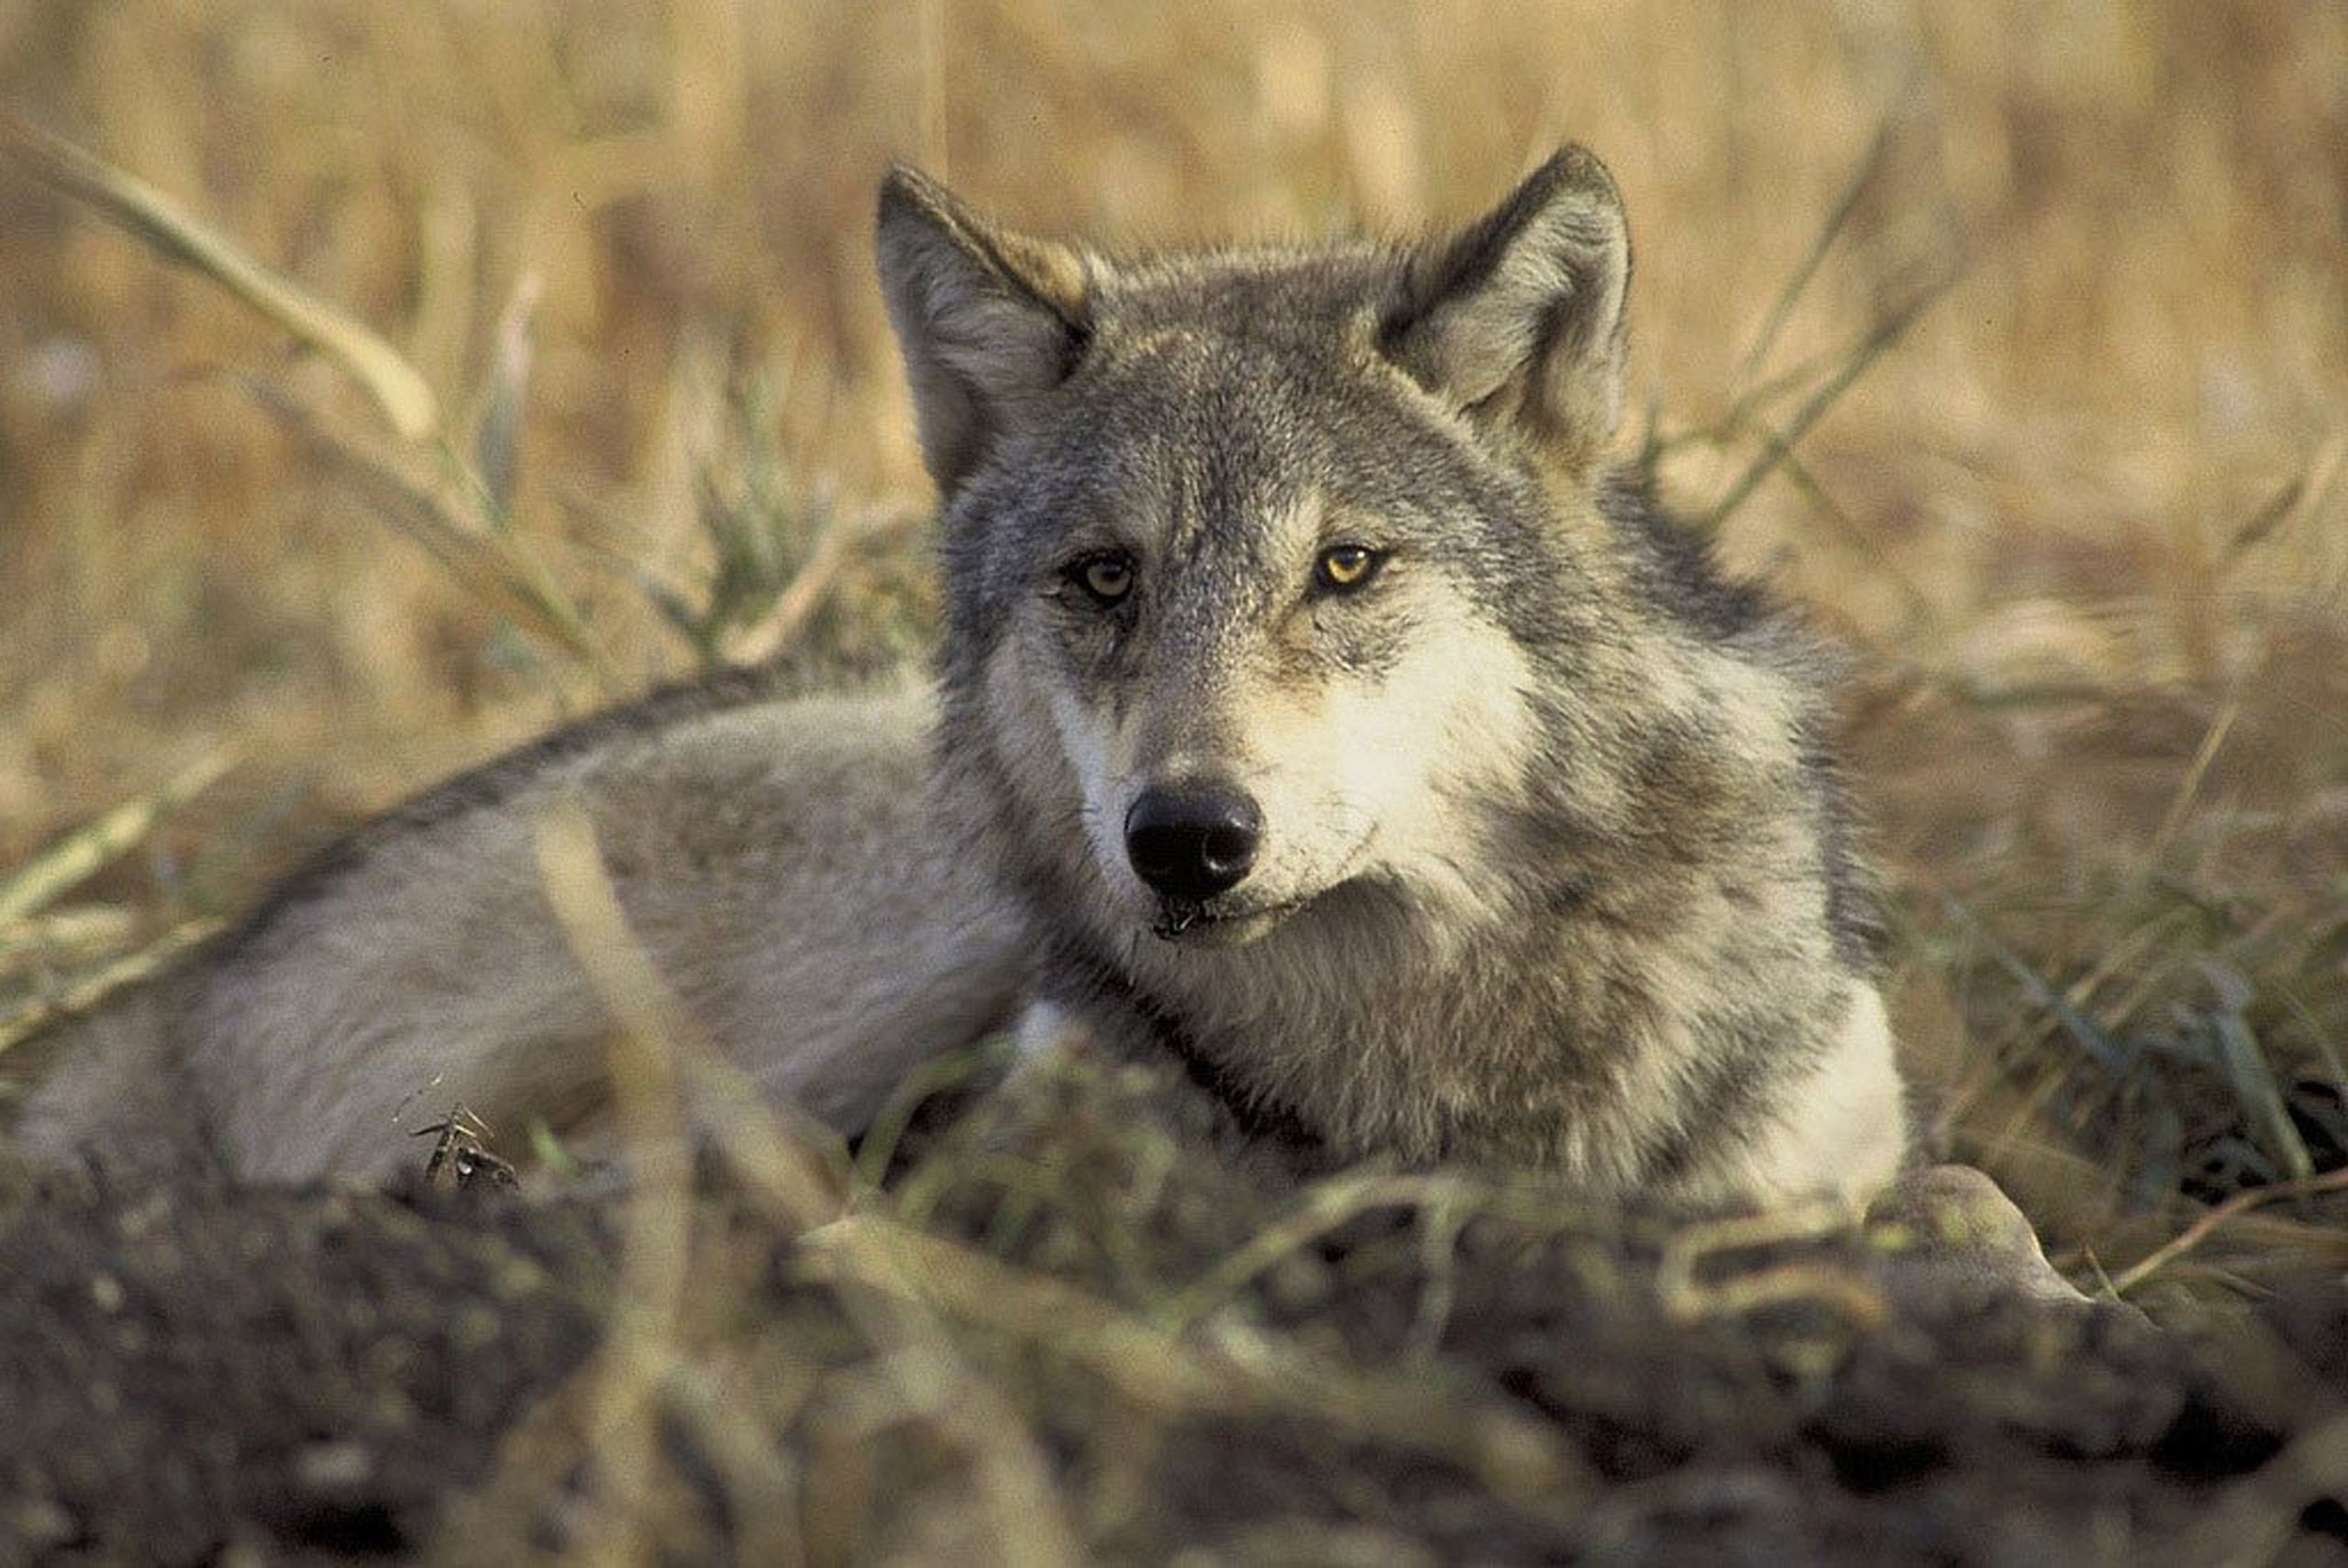 An endangered gray wolf is pictured in this undated handout photo from the U.S. Fish and Wildlife Service. (U.S. Fish and Wildlife Service/Reuters)